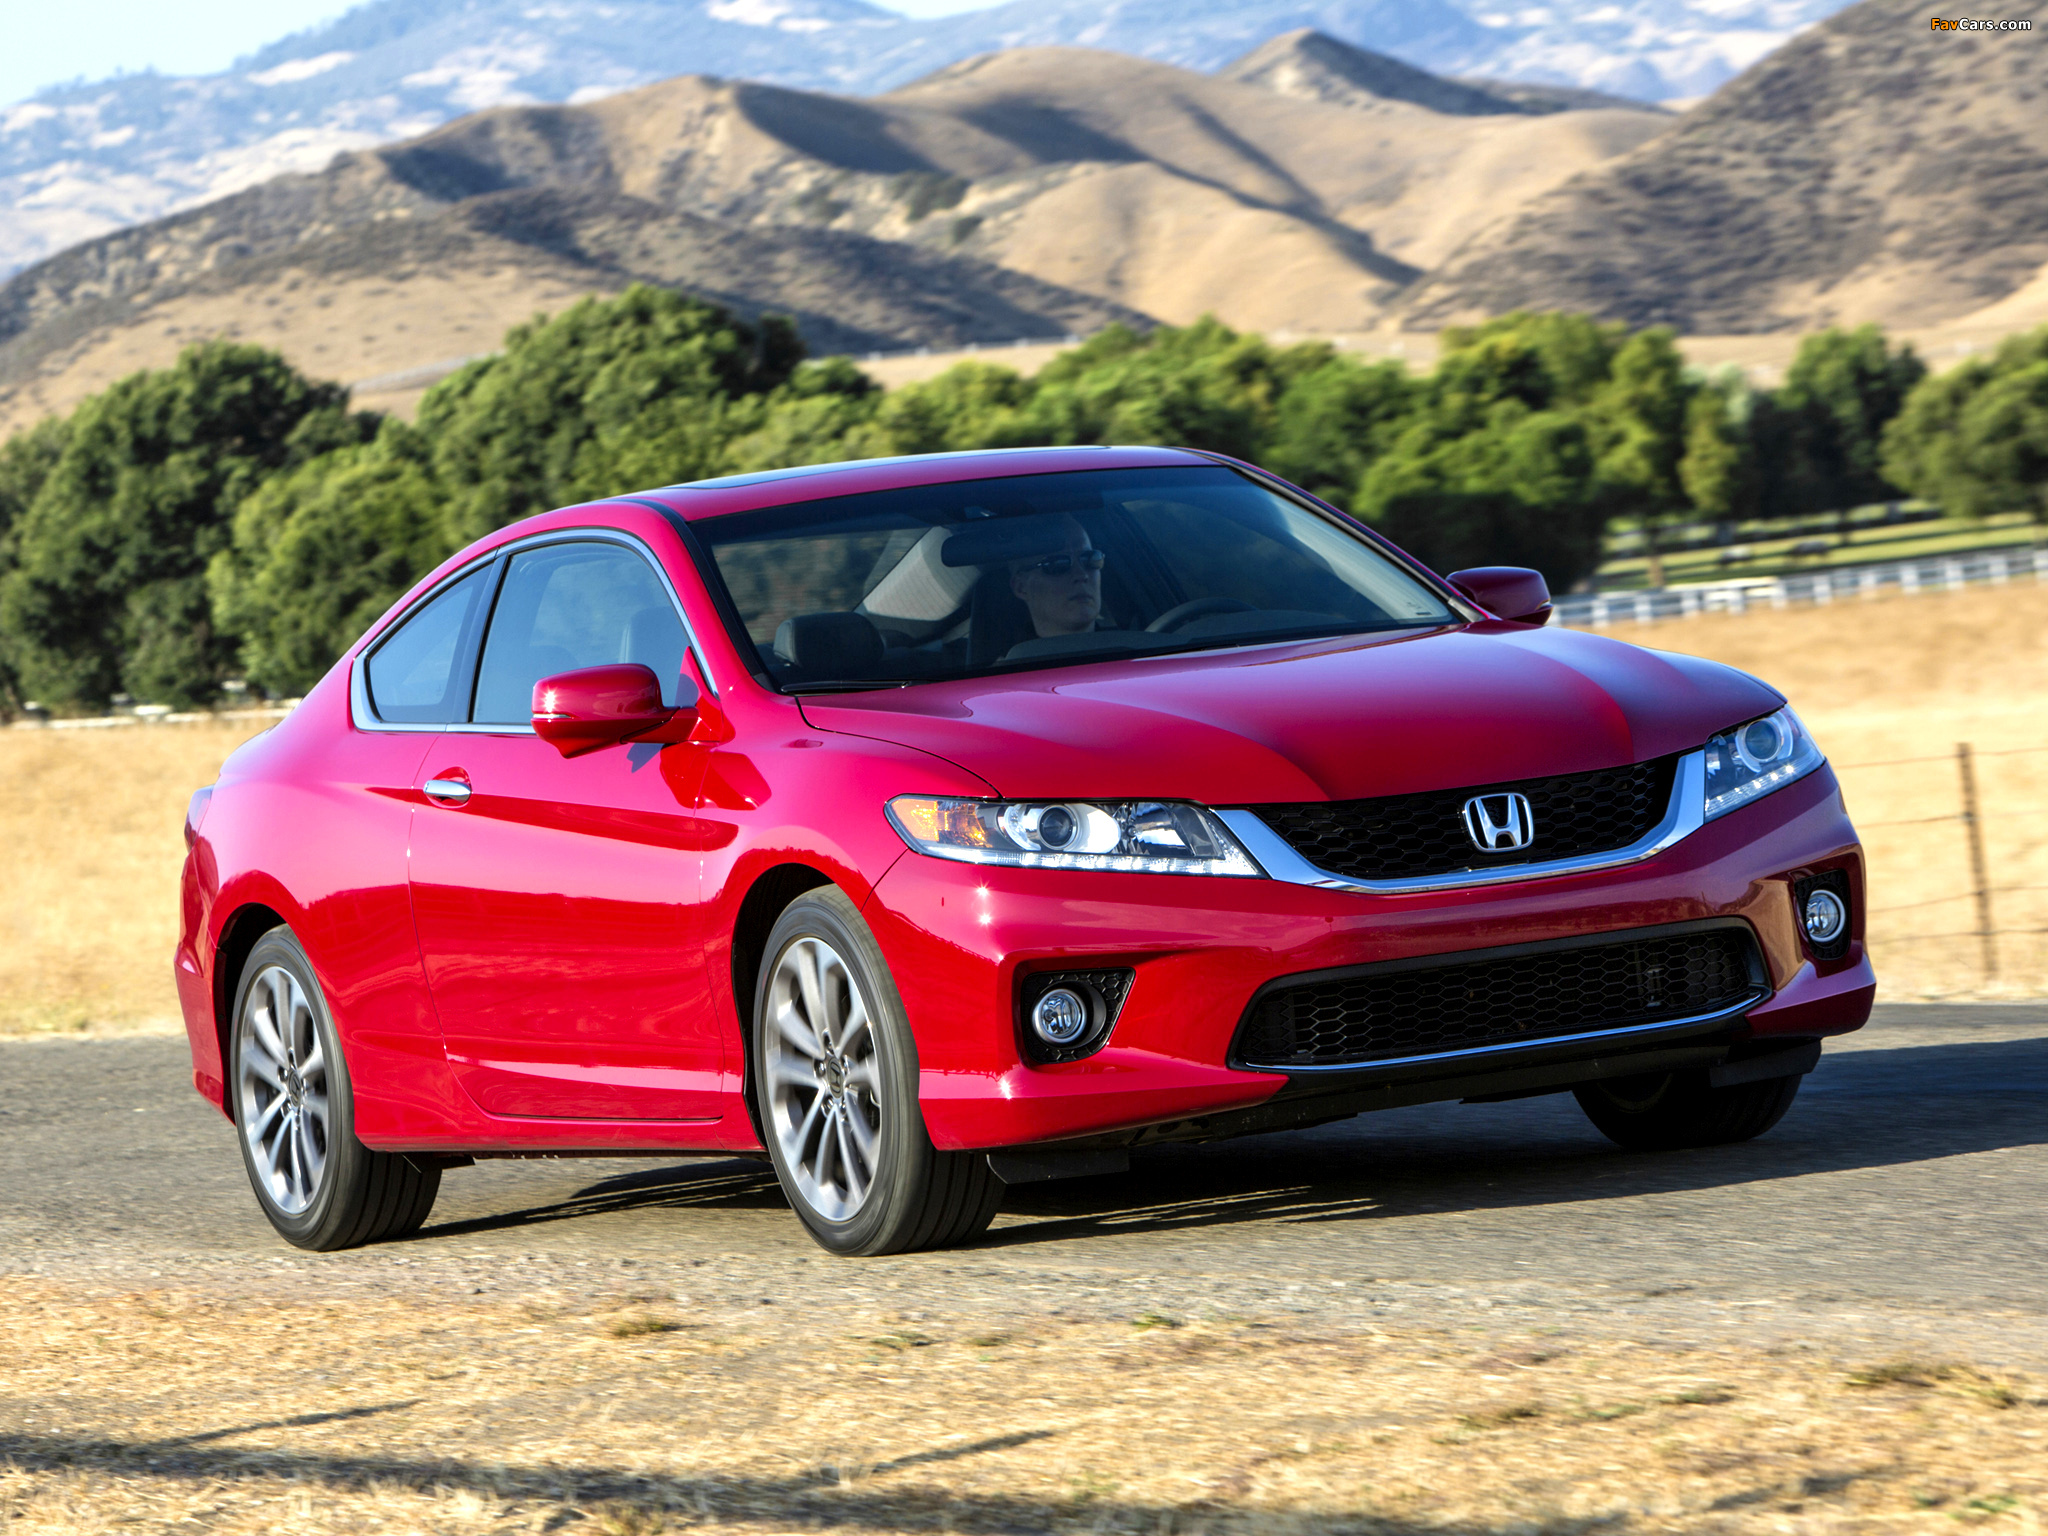 Honda Accord EX-L V6 Coupe 2012 pictures (2048 x 1536)